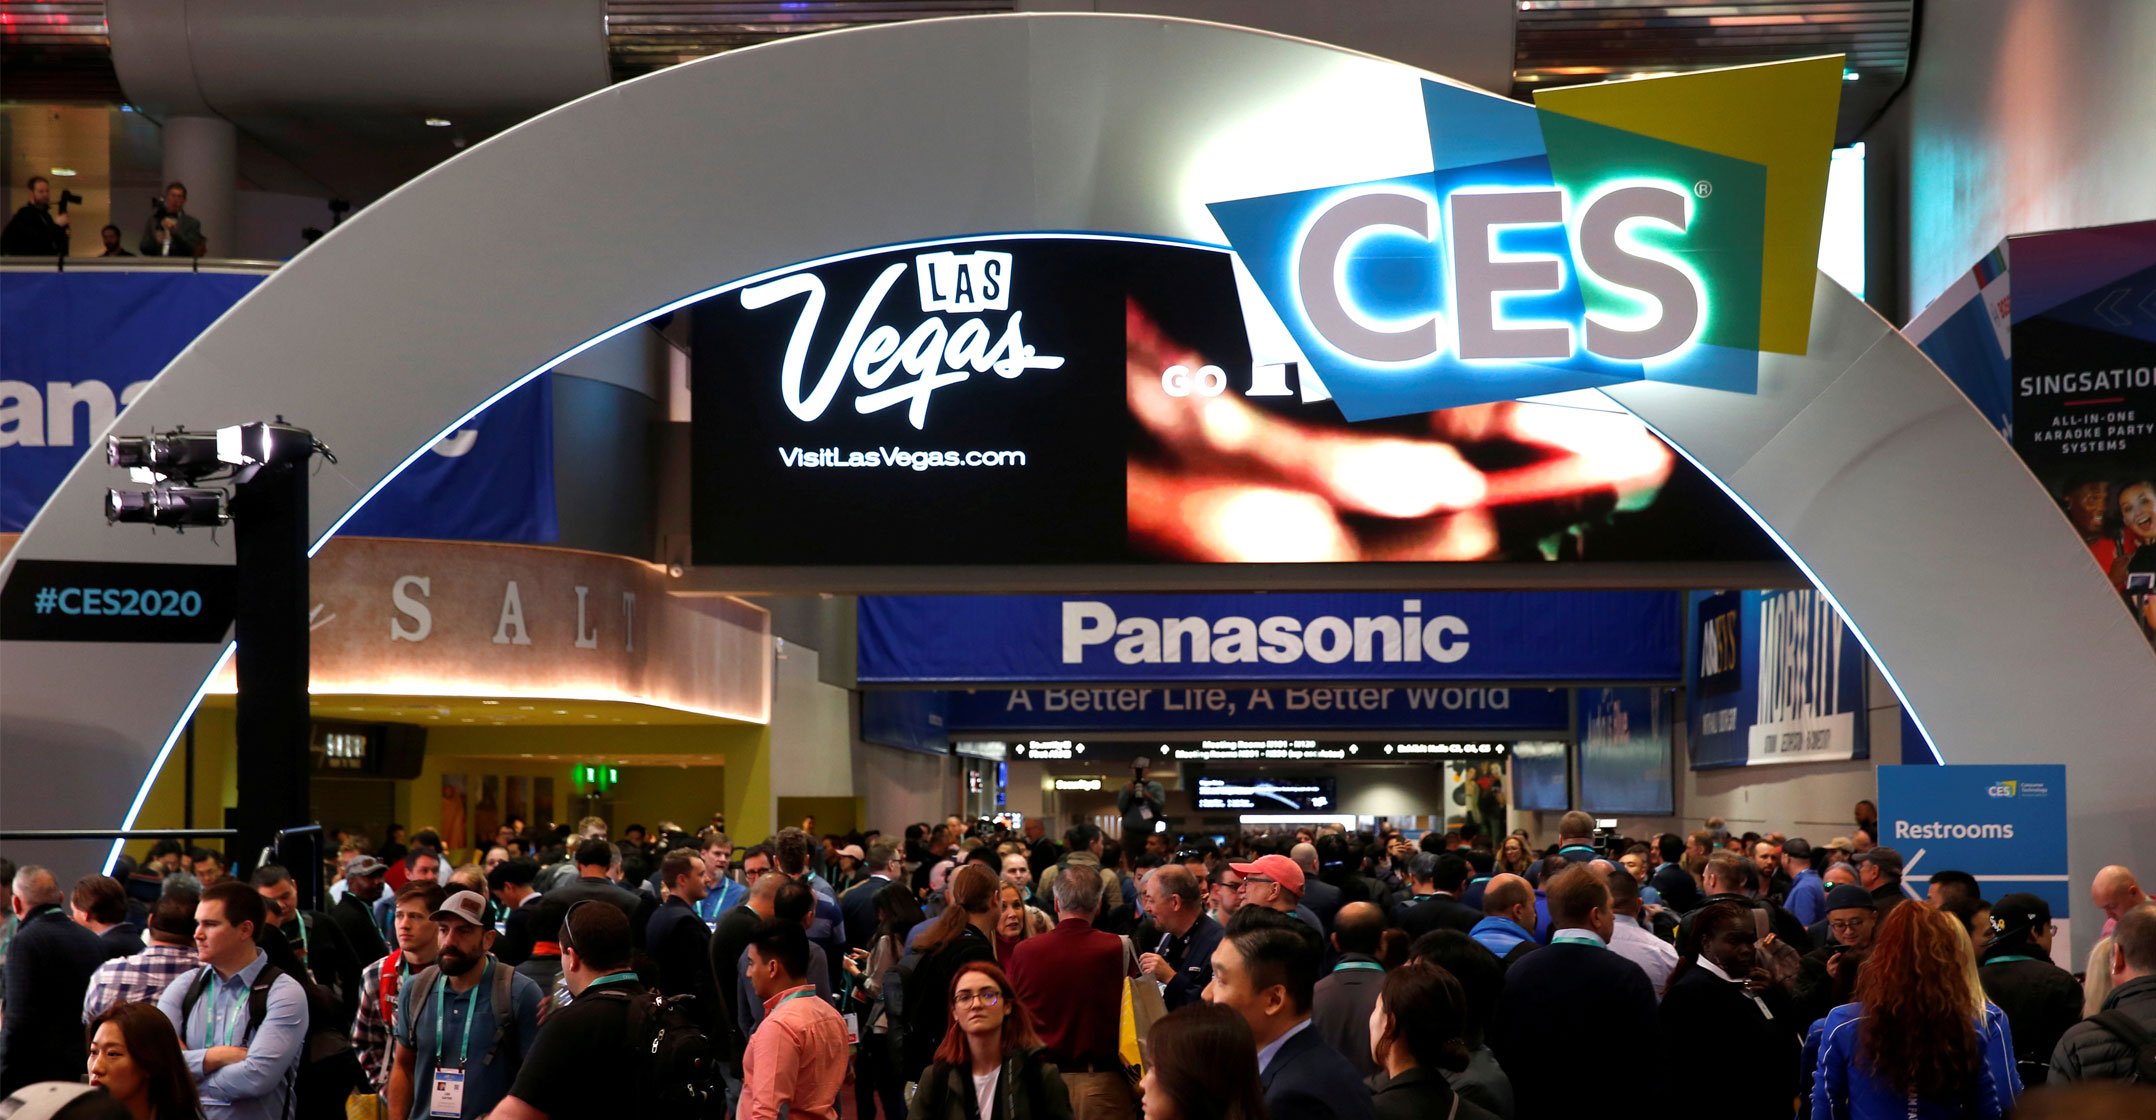 CES, the world's biggest tech event, is going online only TechCentral